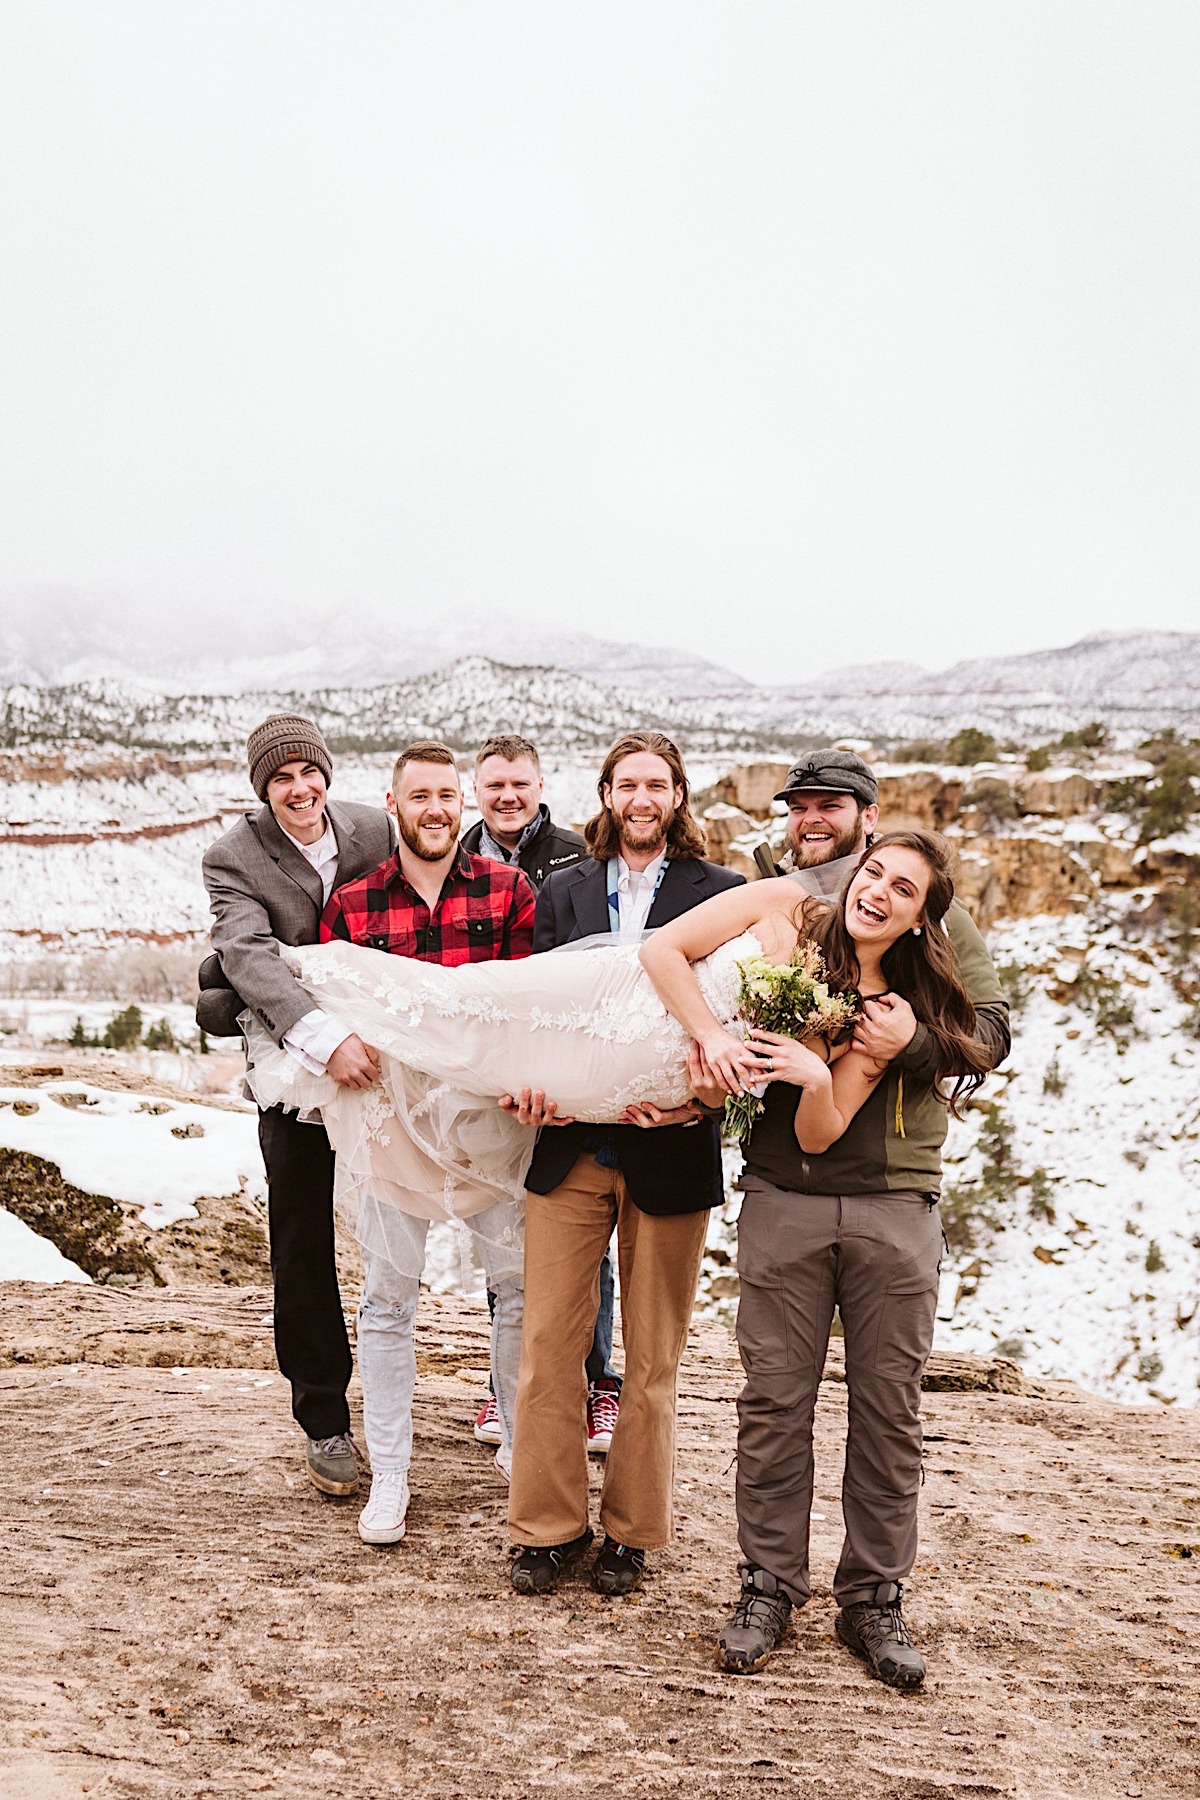 Groomsmen hold the bride across their arms, the snowy hills and cliffs of Zion National Park in the background.